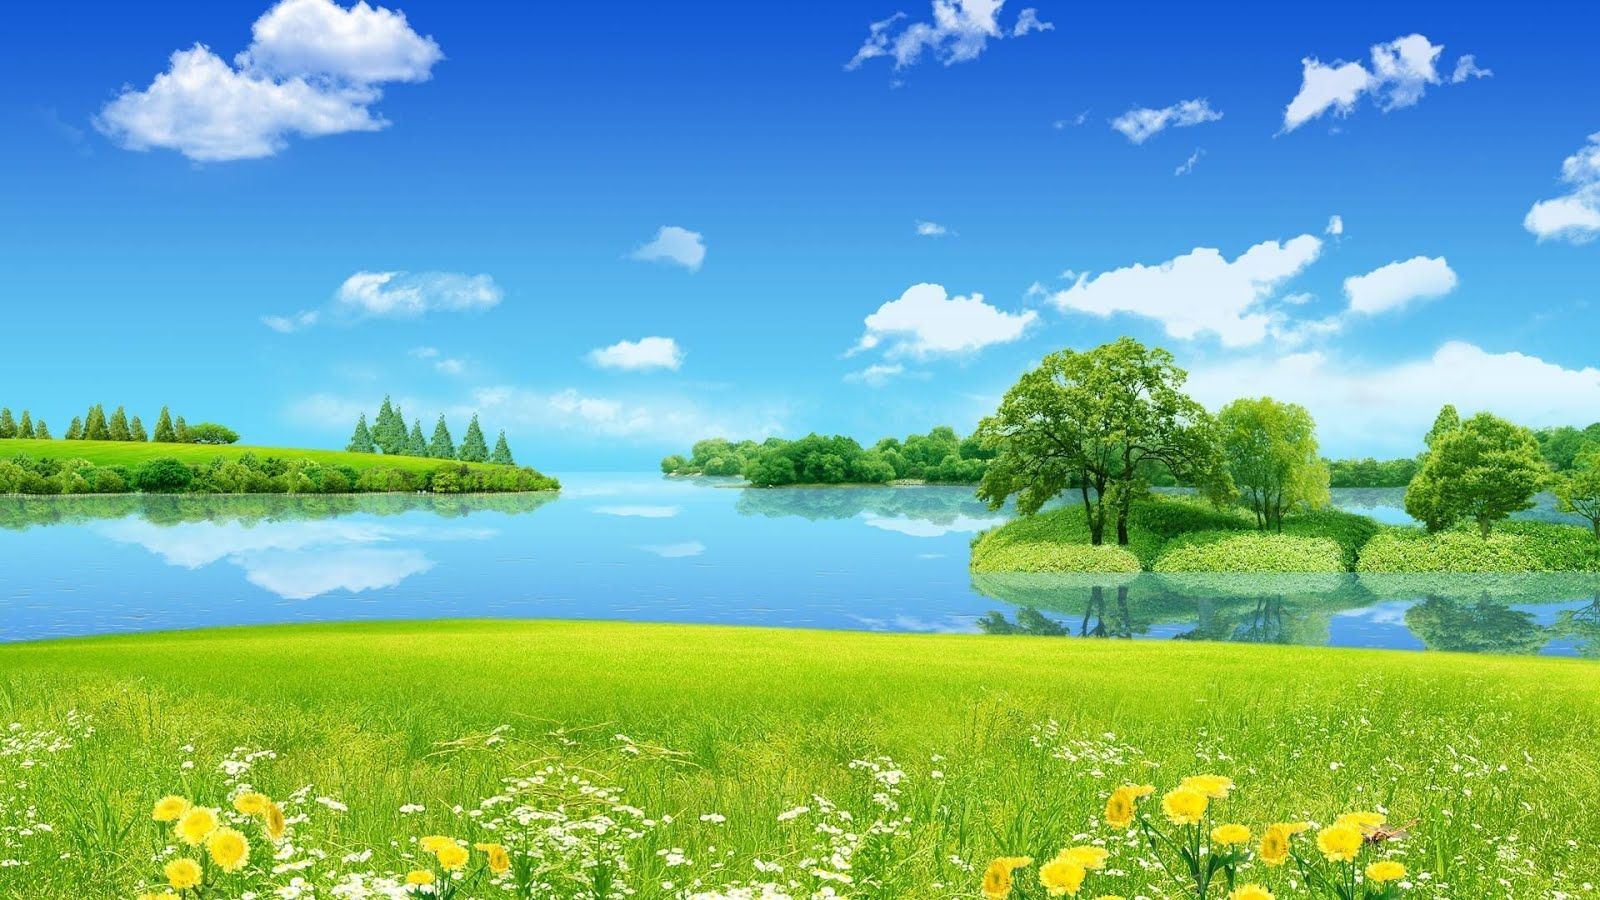 Animated Nature Wallpaper - Free Animated Wallpaper